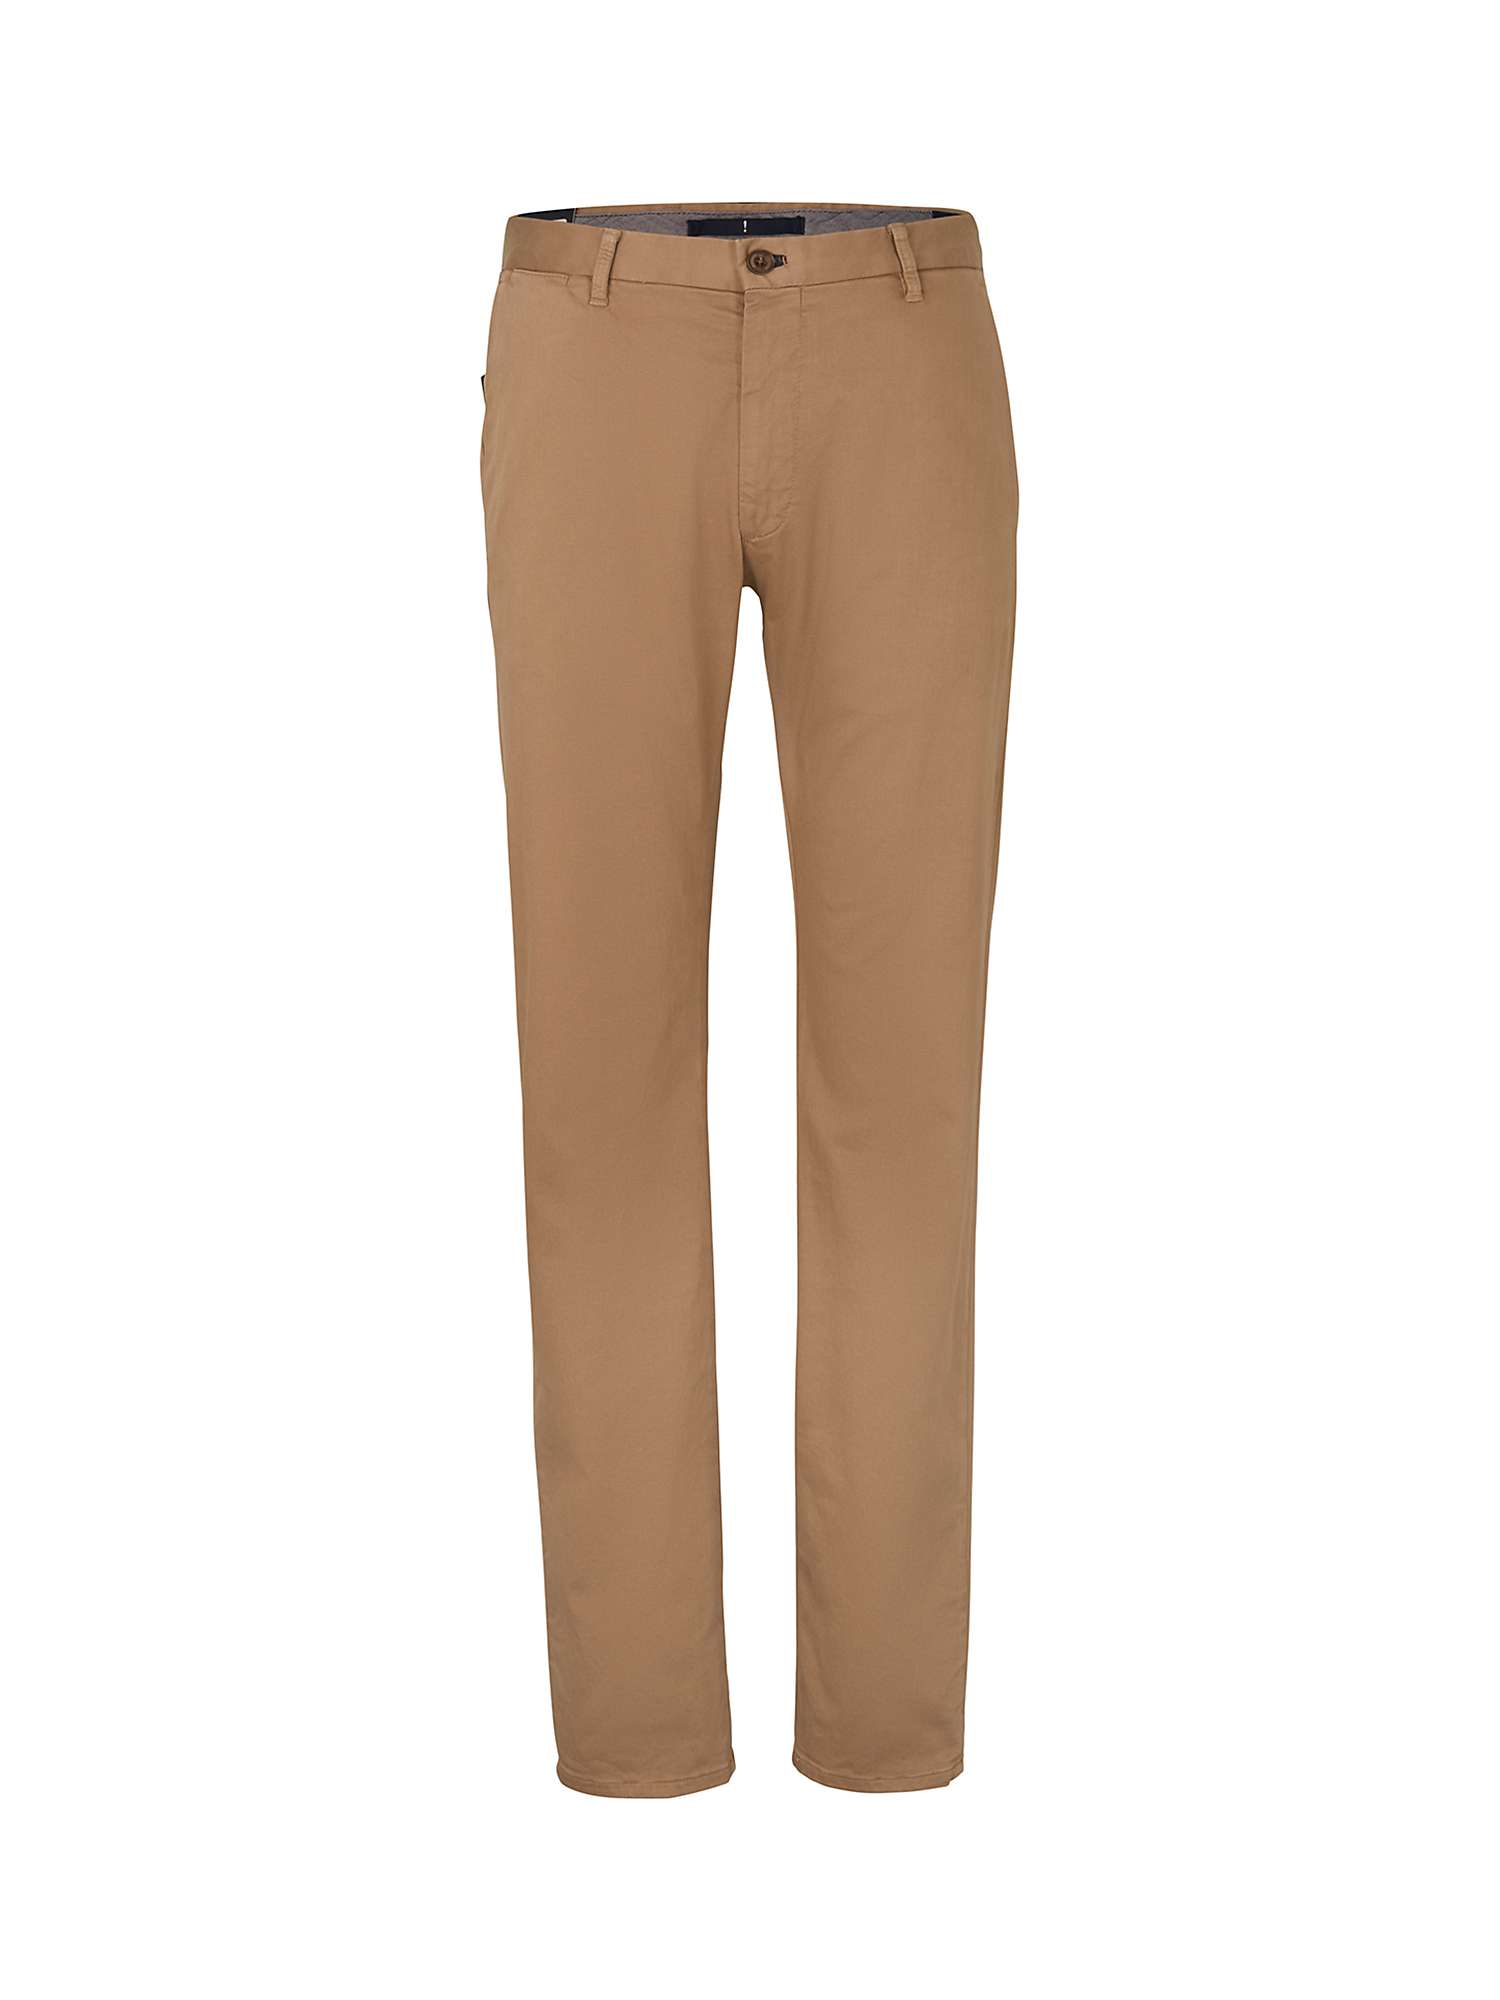 Buy JOOP! Steen Cotton Blend Chino Trousers Online at johnlewis.com